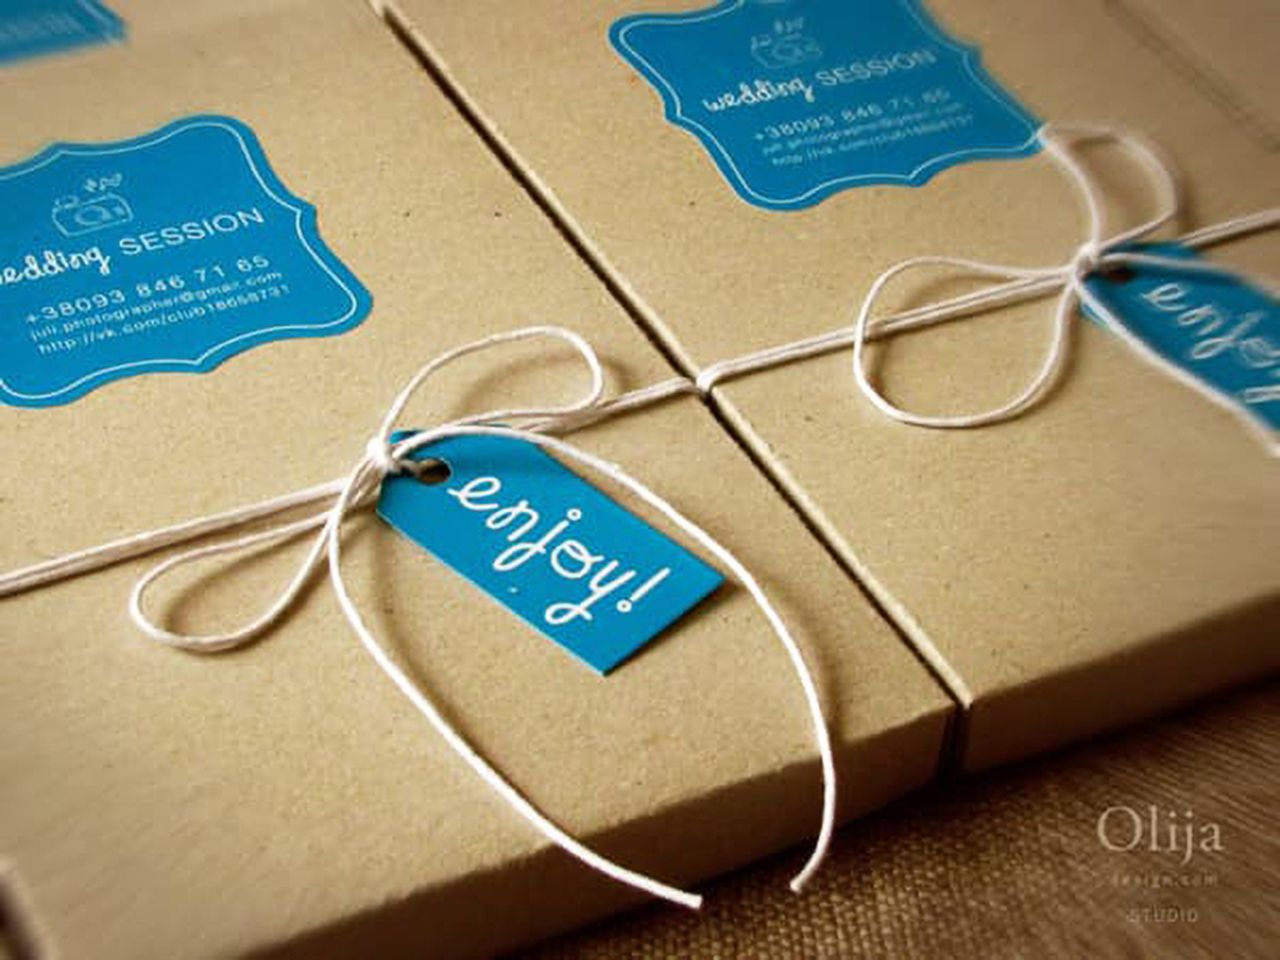 Simple 'enjoy' hang tag attached to product packaging as one of the hang tag examples.